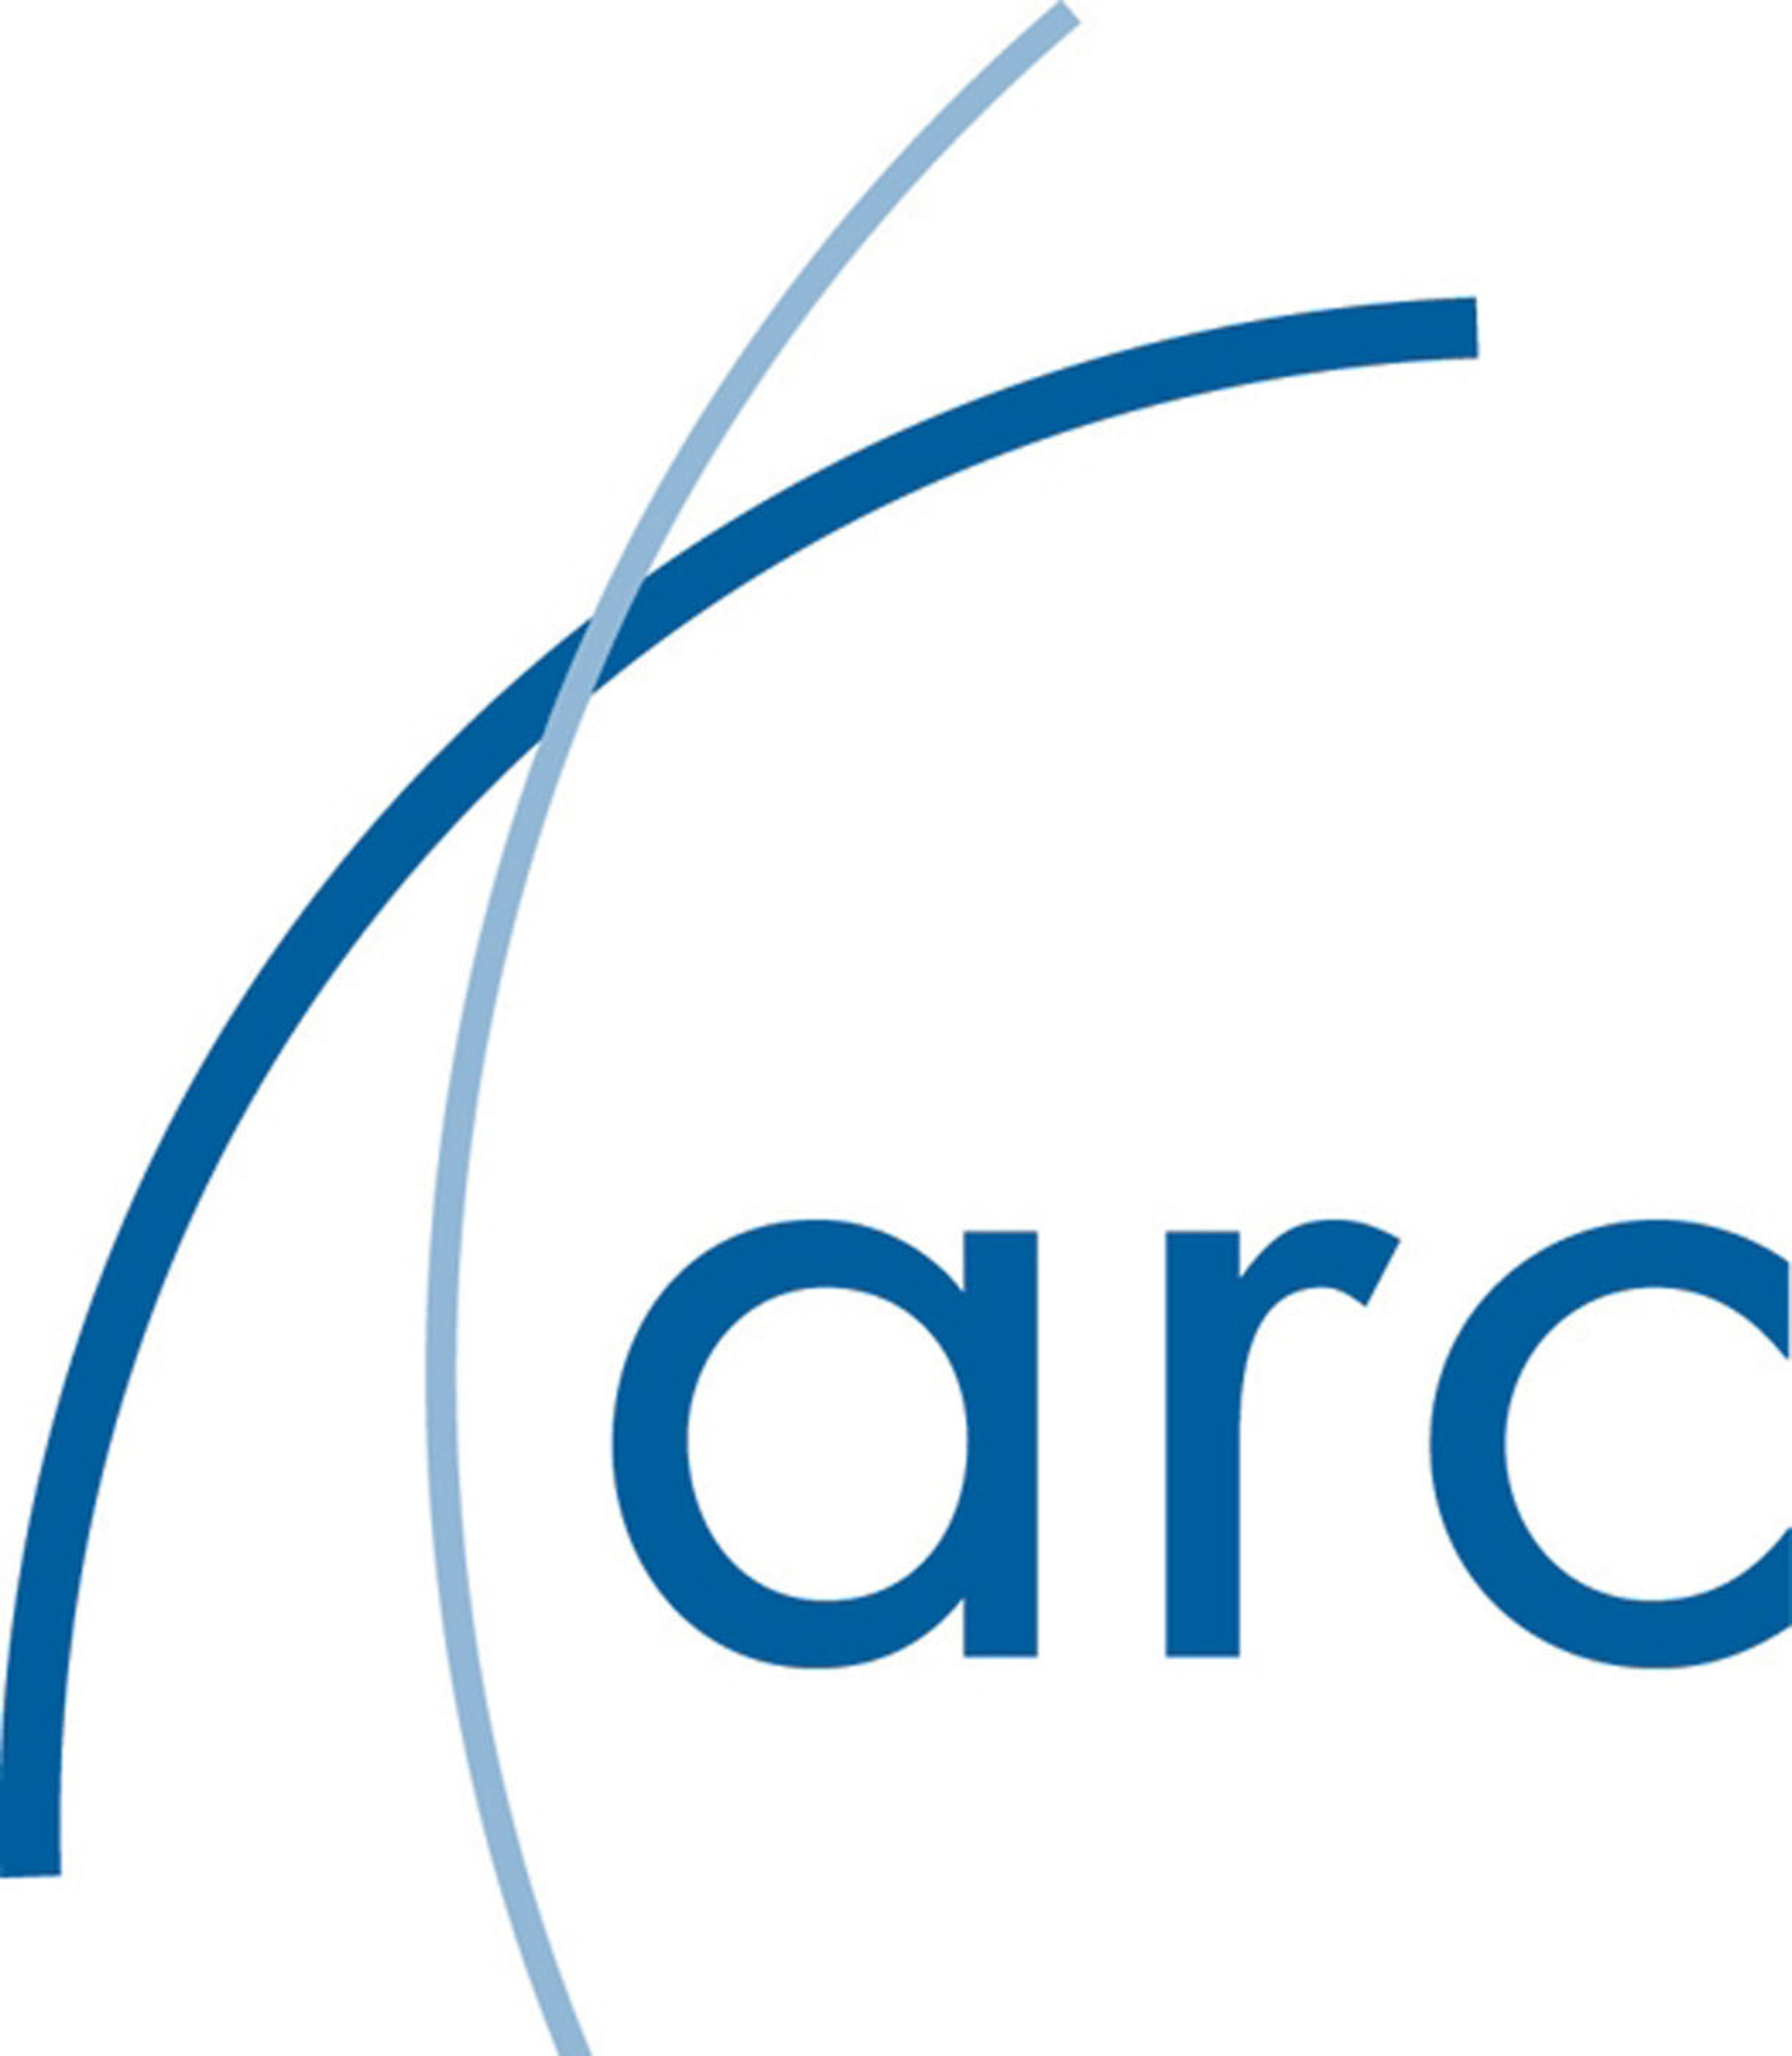 As the financial backbone of the U.S. travel industry, ARC enables commerce among travel agencies, airlines, and travel suppliers, and offers them secure and accurate financial settlement services. About 16,000 travel agencies and 190 airlines make up the ARC network. In 2011, ARC settled more than $82 billion worth of transactions between travel sellers and airlines. ARC also supplies transactional data to organizations, facilitating better business decisions through fact-based market analyses.